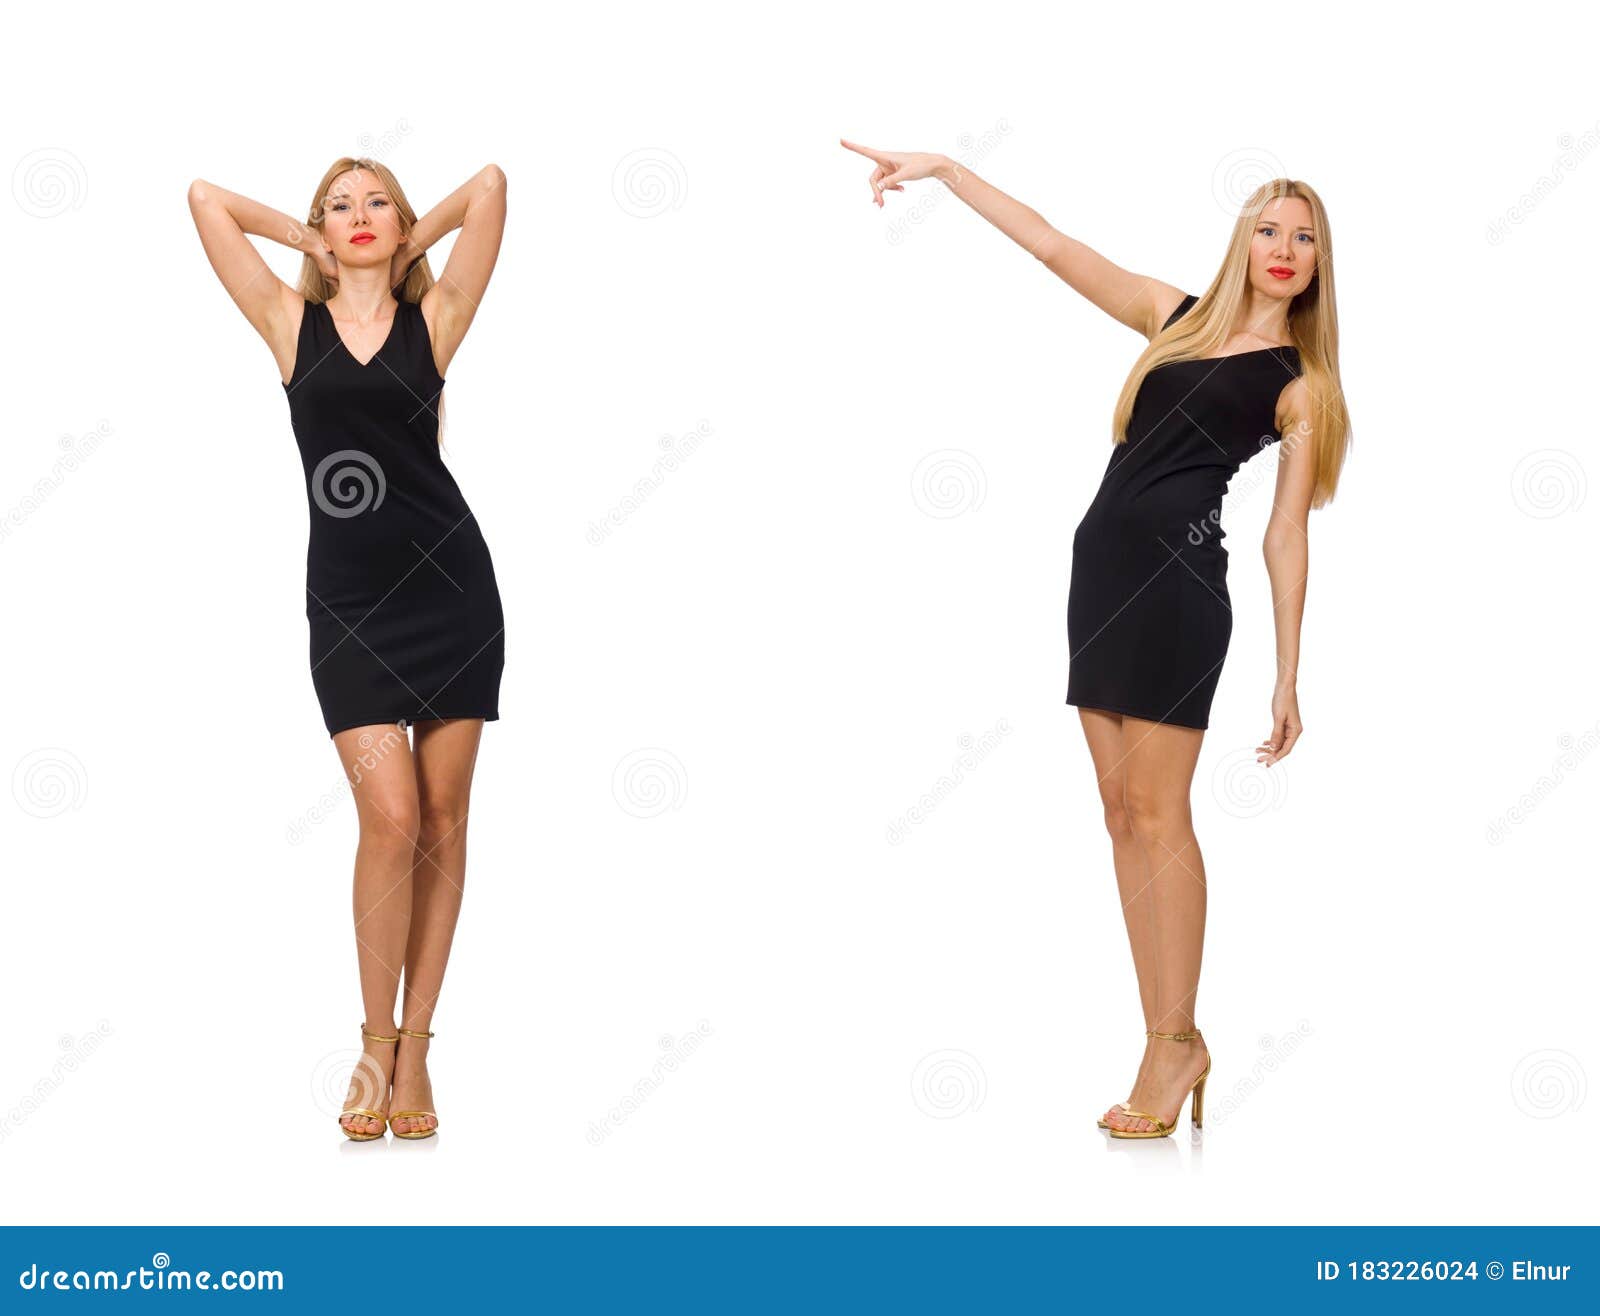 Young Pretty Woman in Mini Black Dress Isolated on White Stock Photo ...